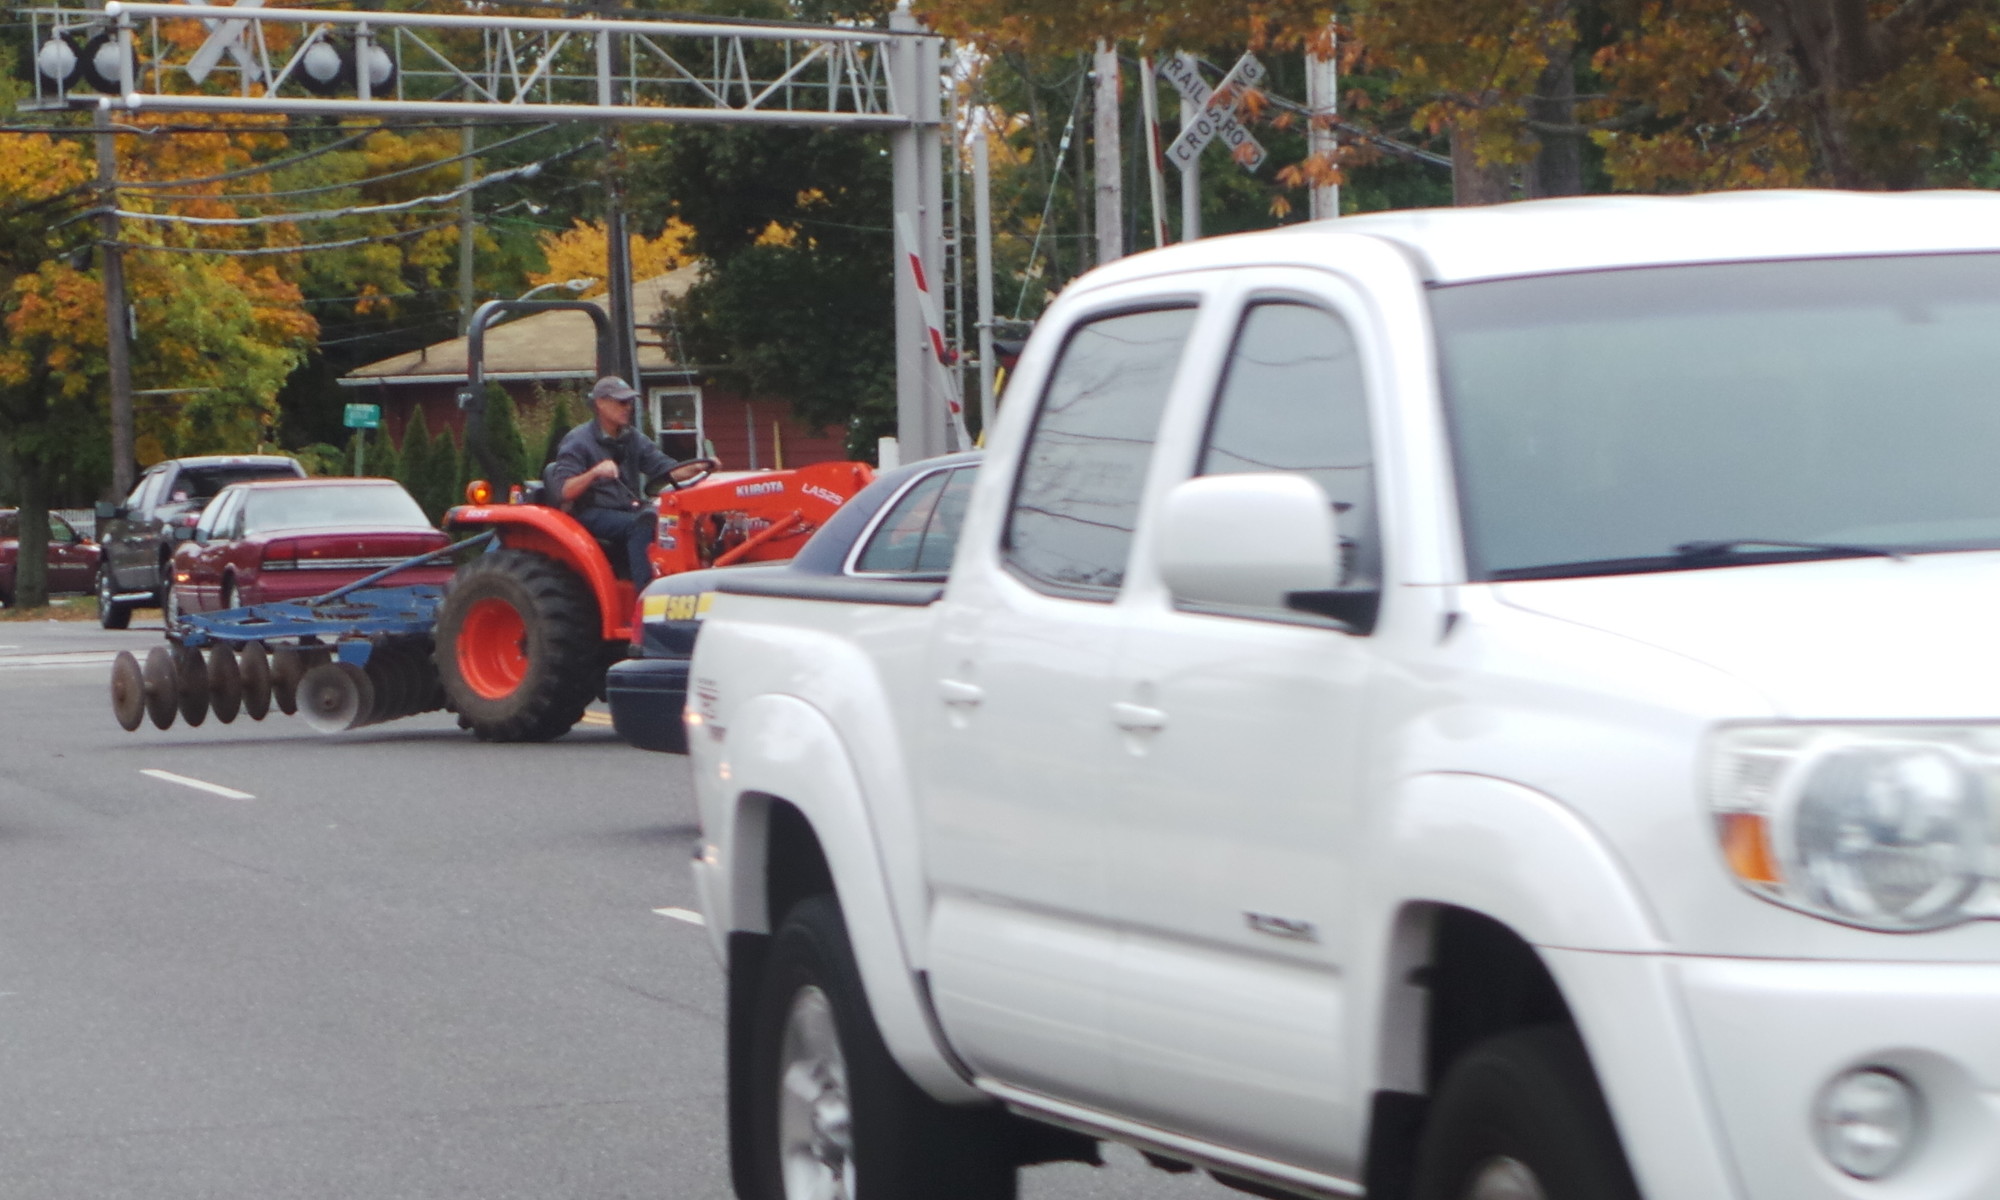 Rick White navigated Ocean Ave. traffic after returning from Malverne High School on the farm's tractor.